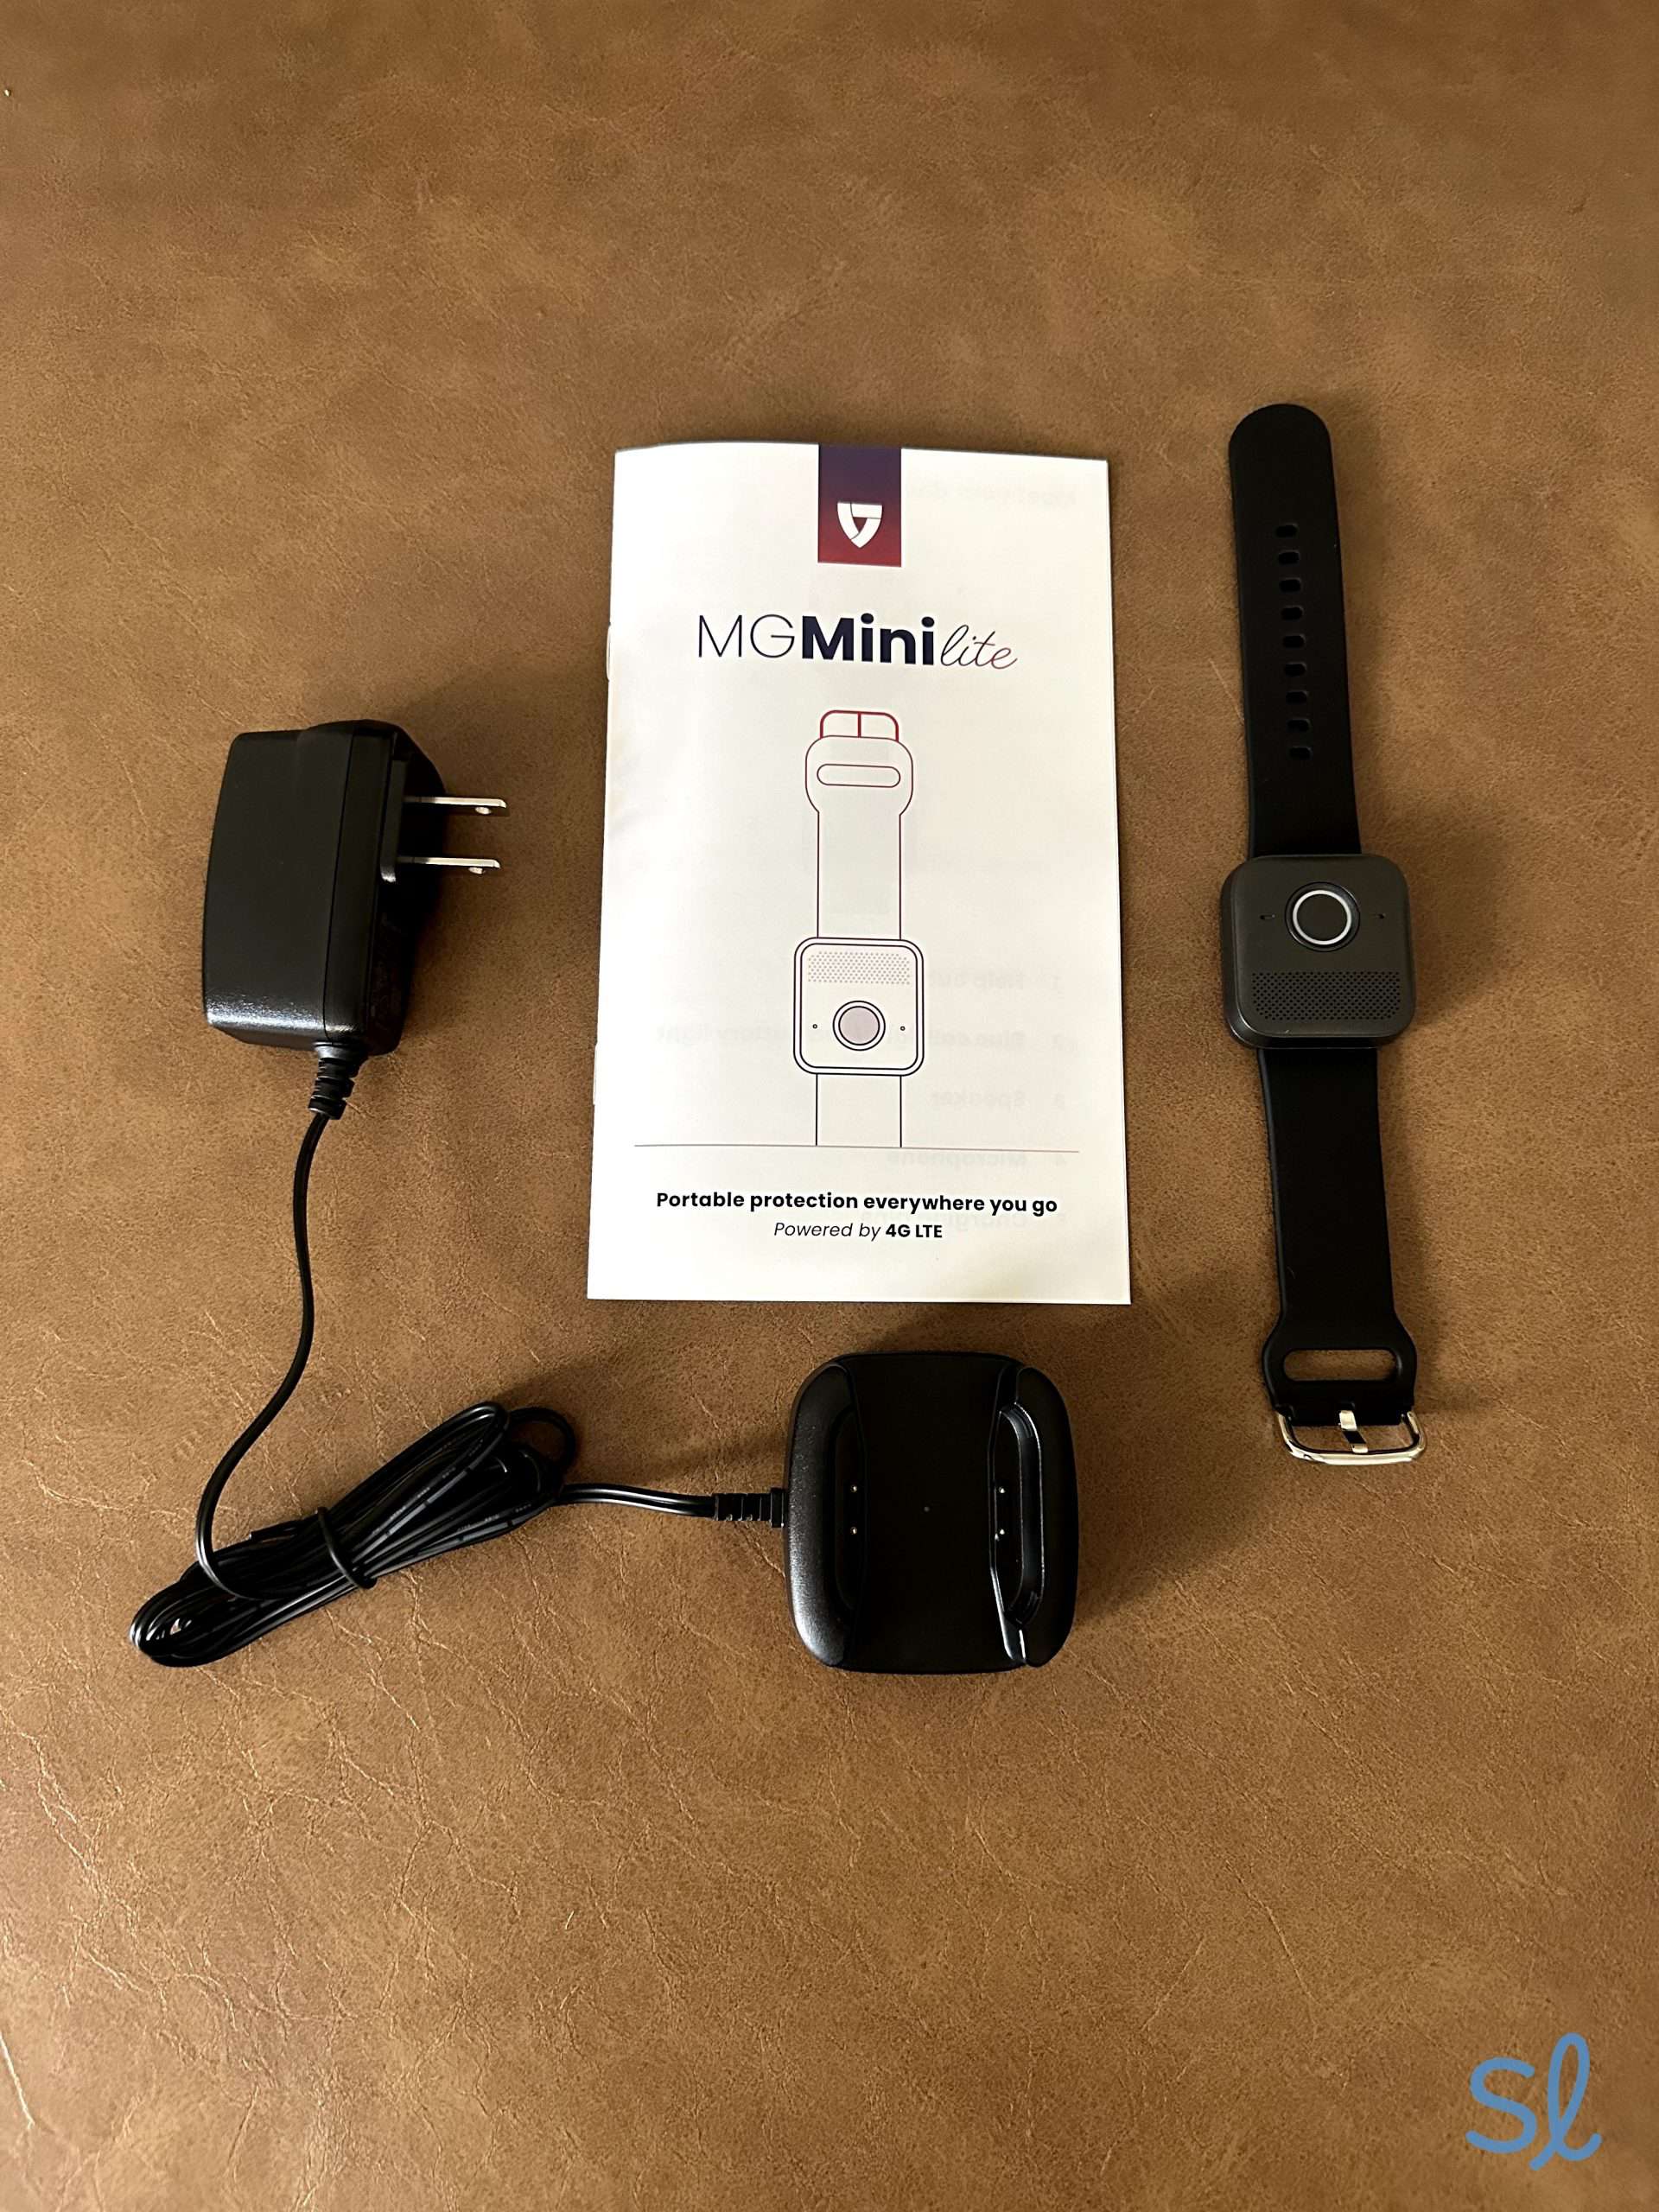 Unboxing the MGMini Lite